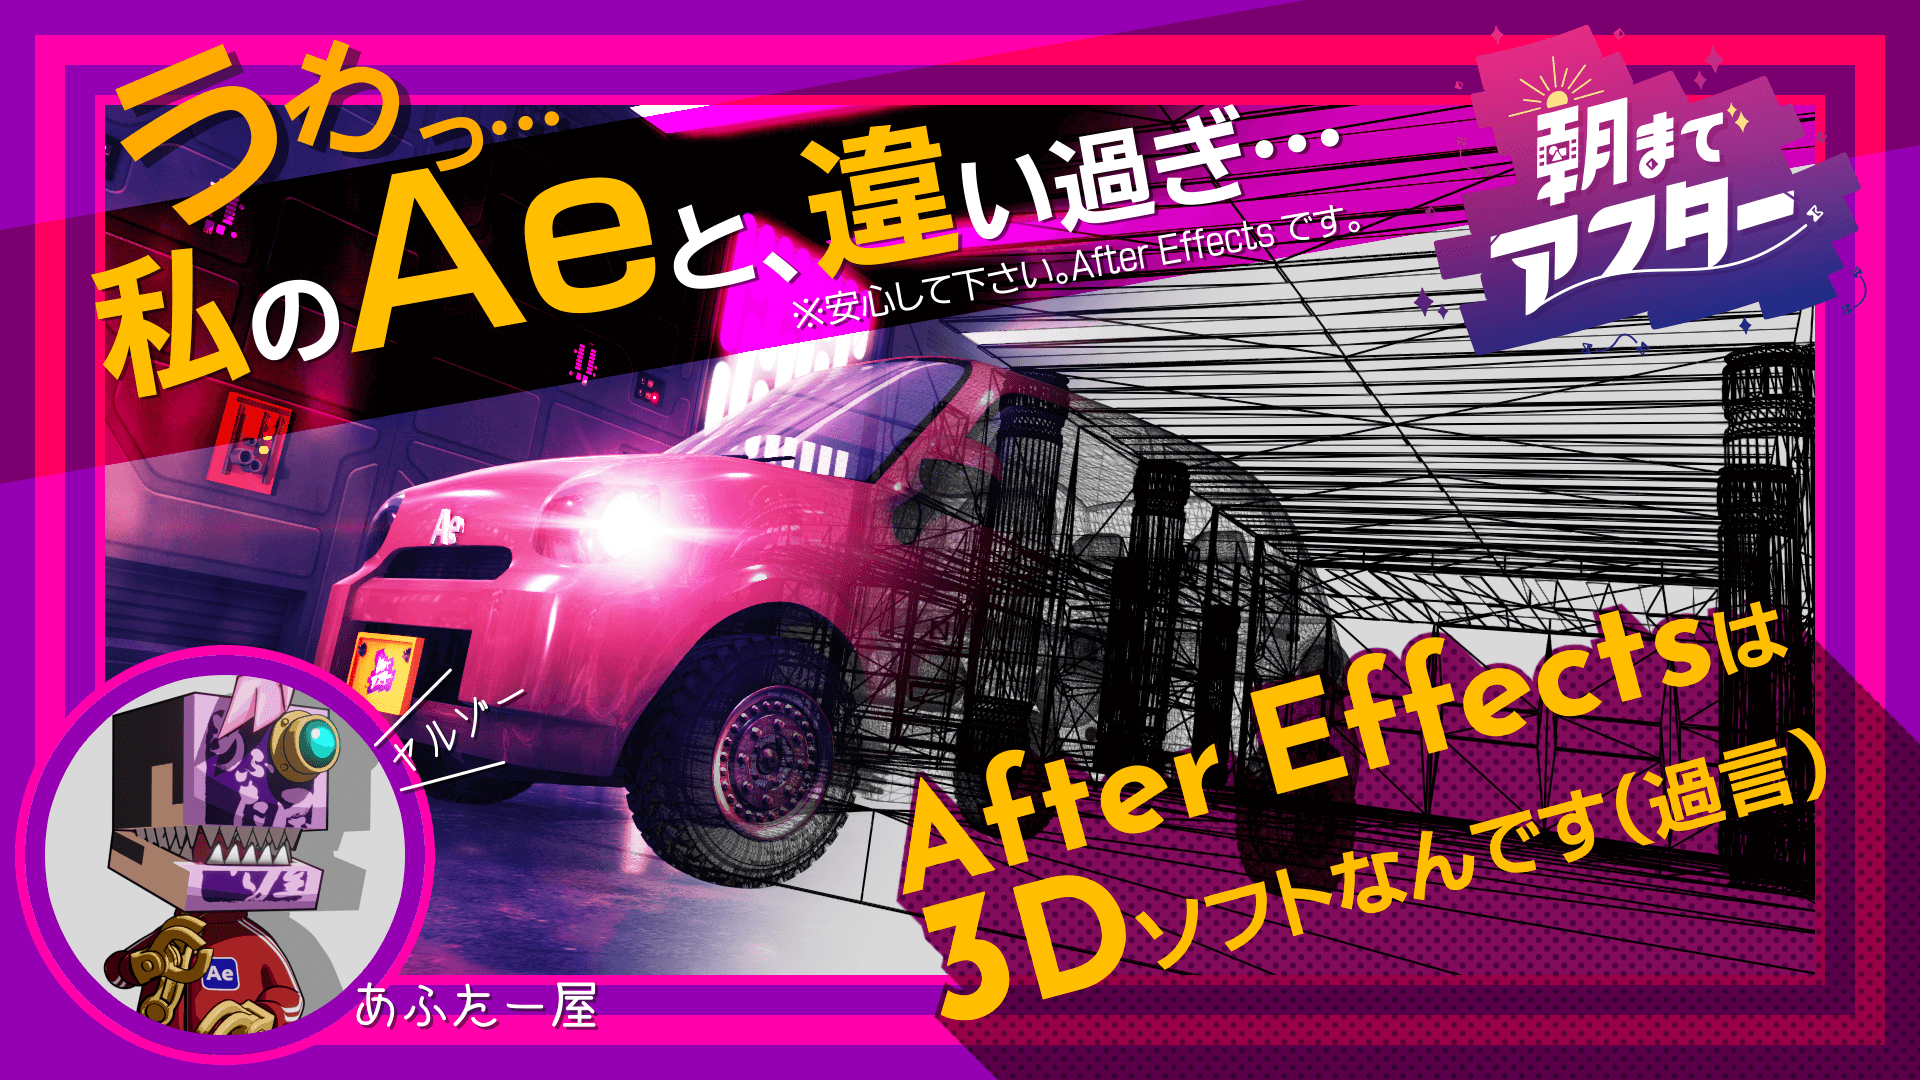 After Effectsは3Dソフトなんです（過言）